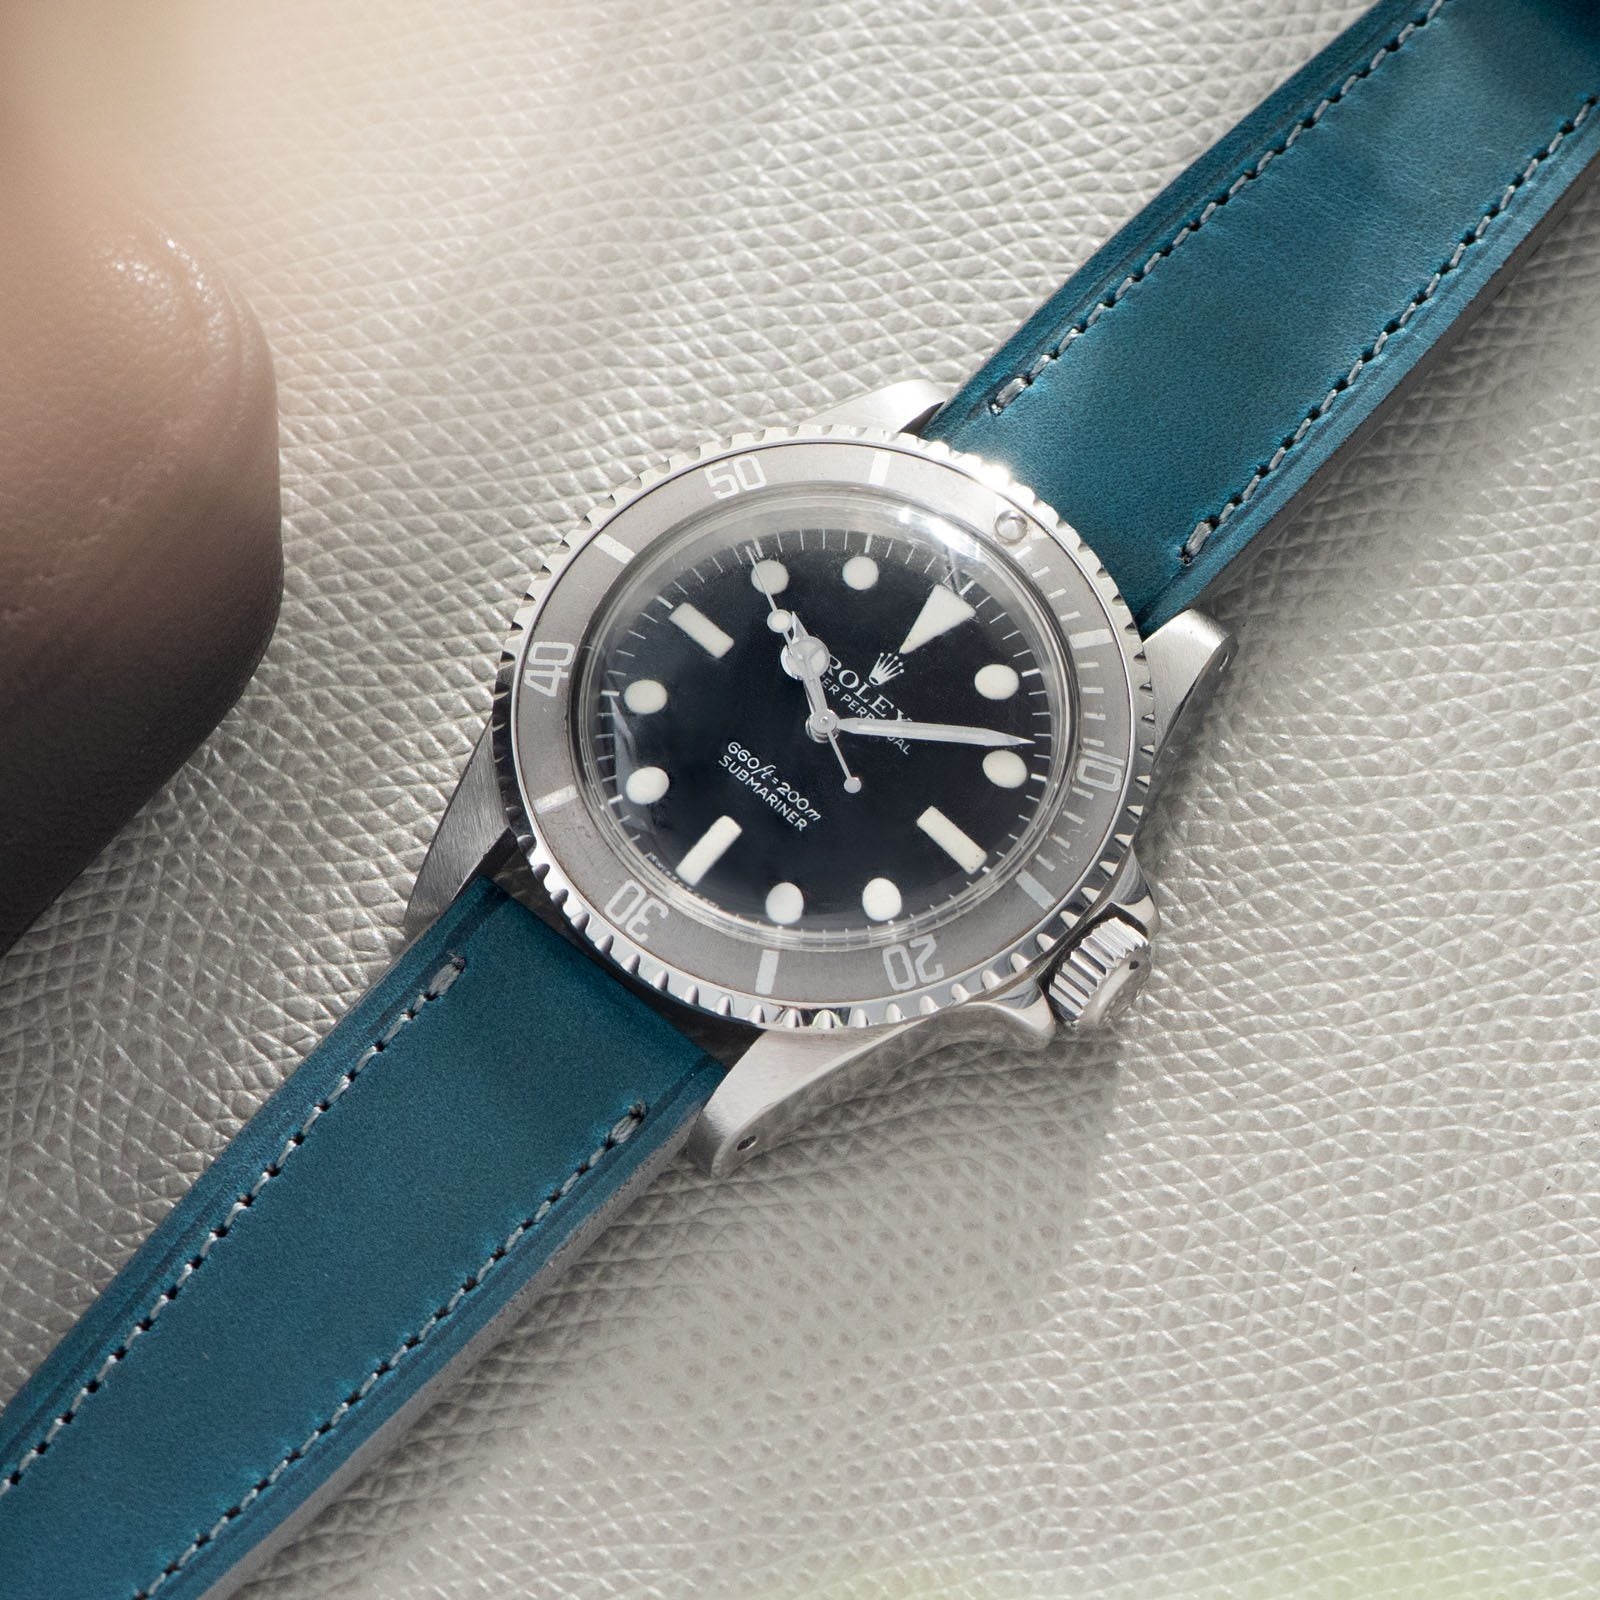 Château de Cassis Blue Horween Leather Watch Strap On a Rolex 5513 Maxi Mk1 Submariner